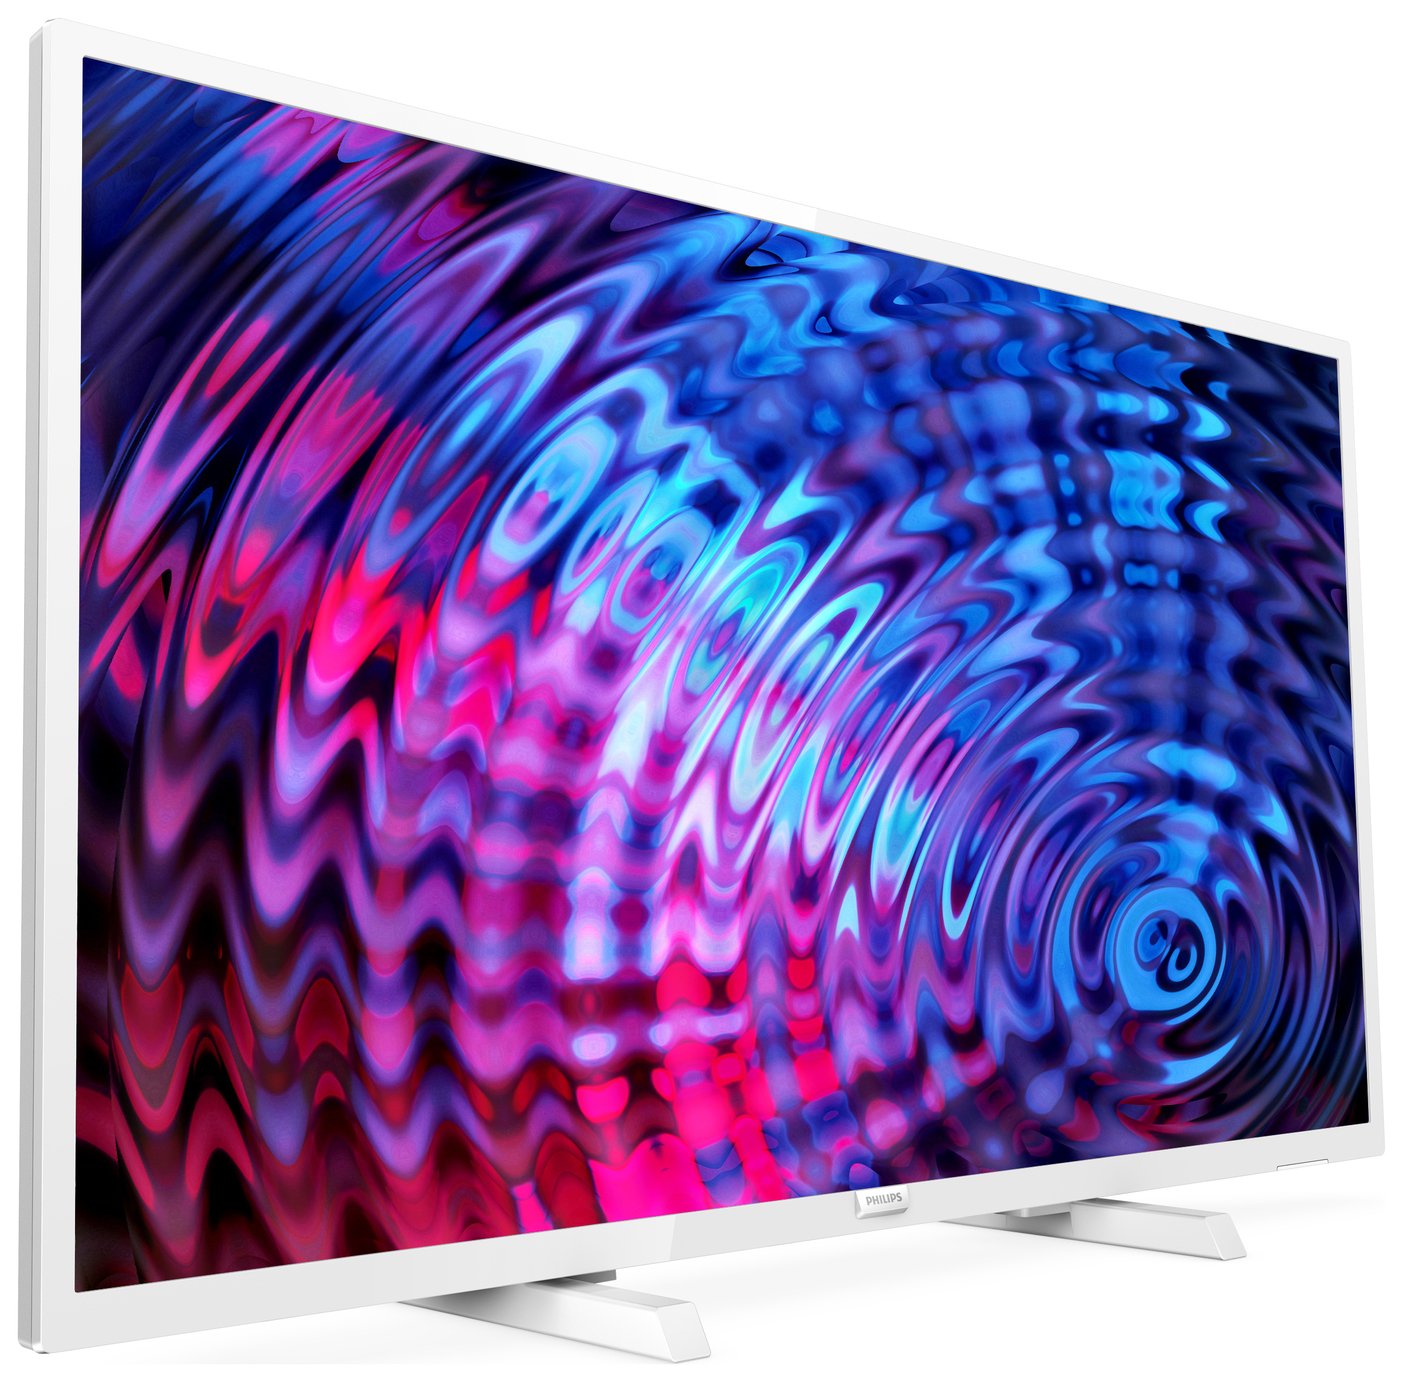 Philips 32 Inch 32PFT5603 Full HD  LED TV Review